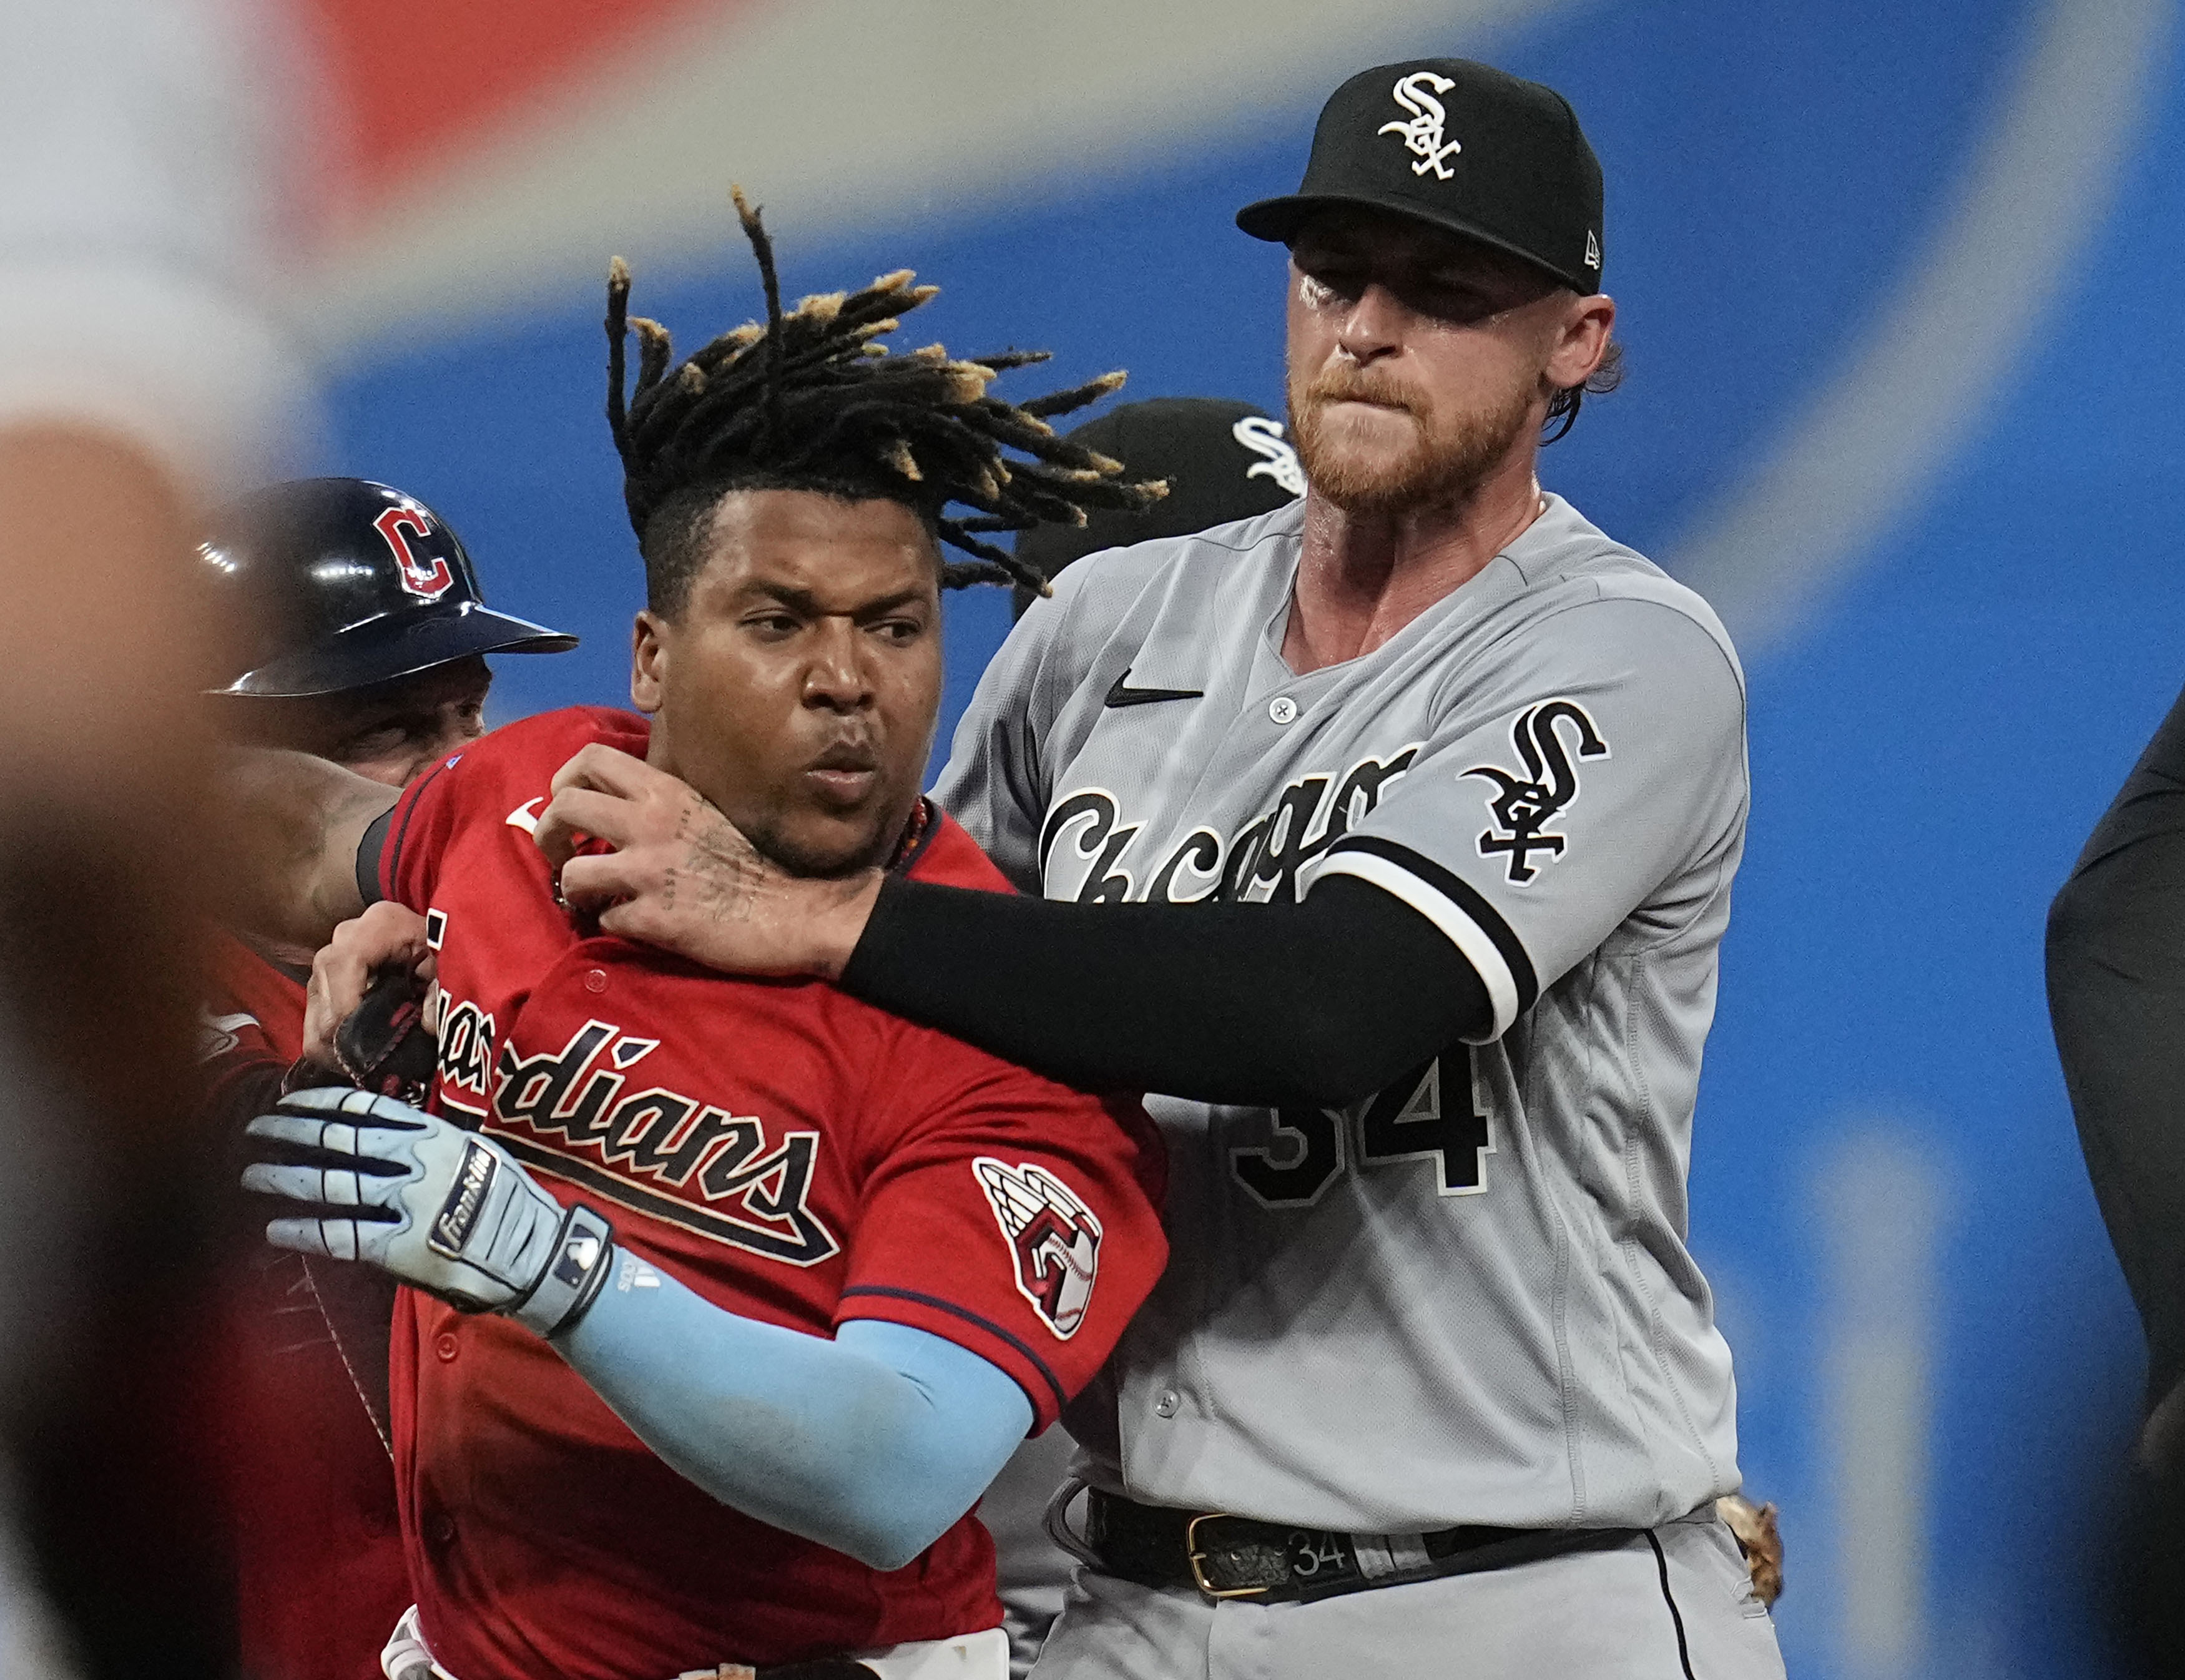 Tim Anderson is tweeting through it after knockout punch by Jose